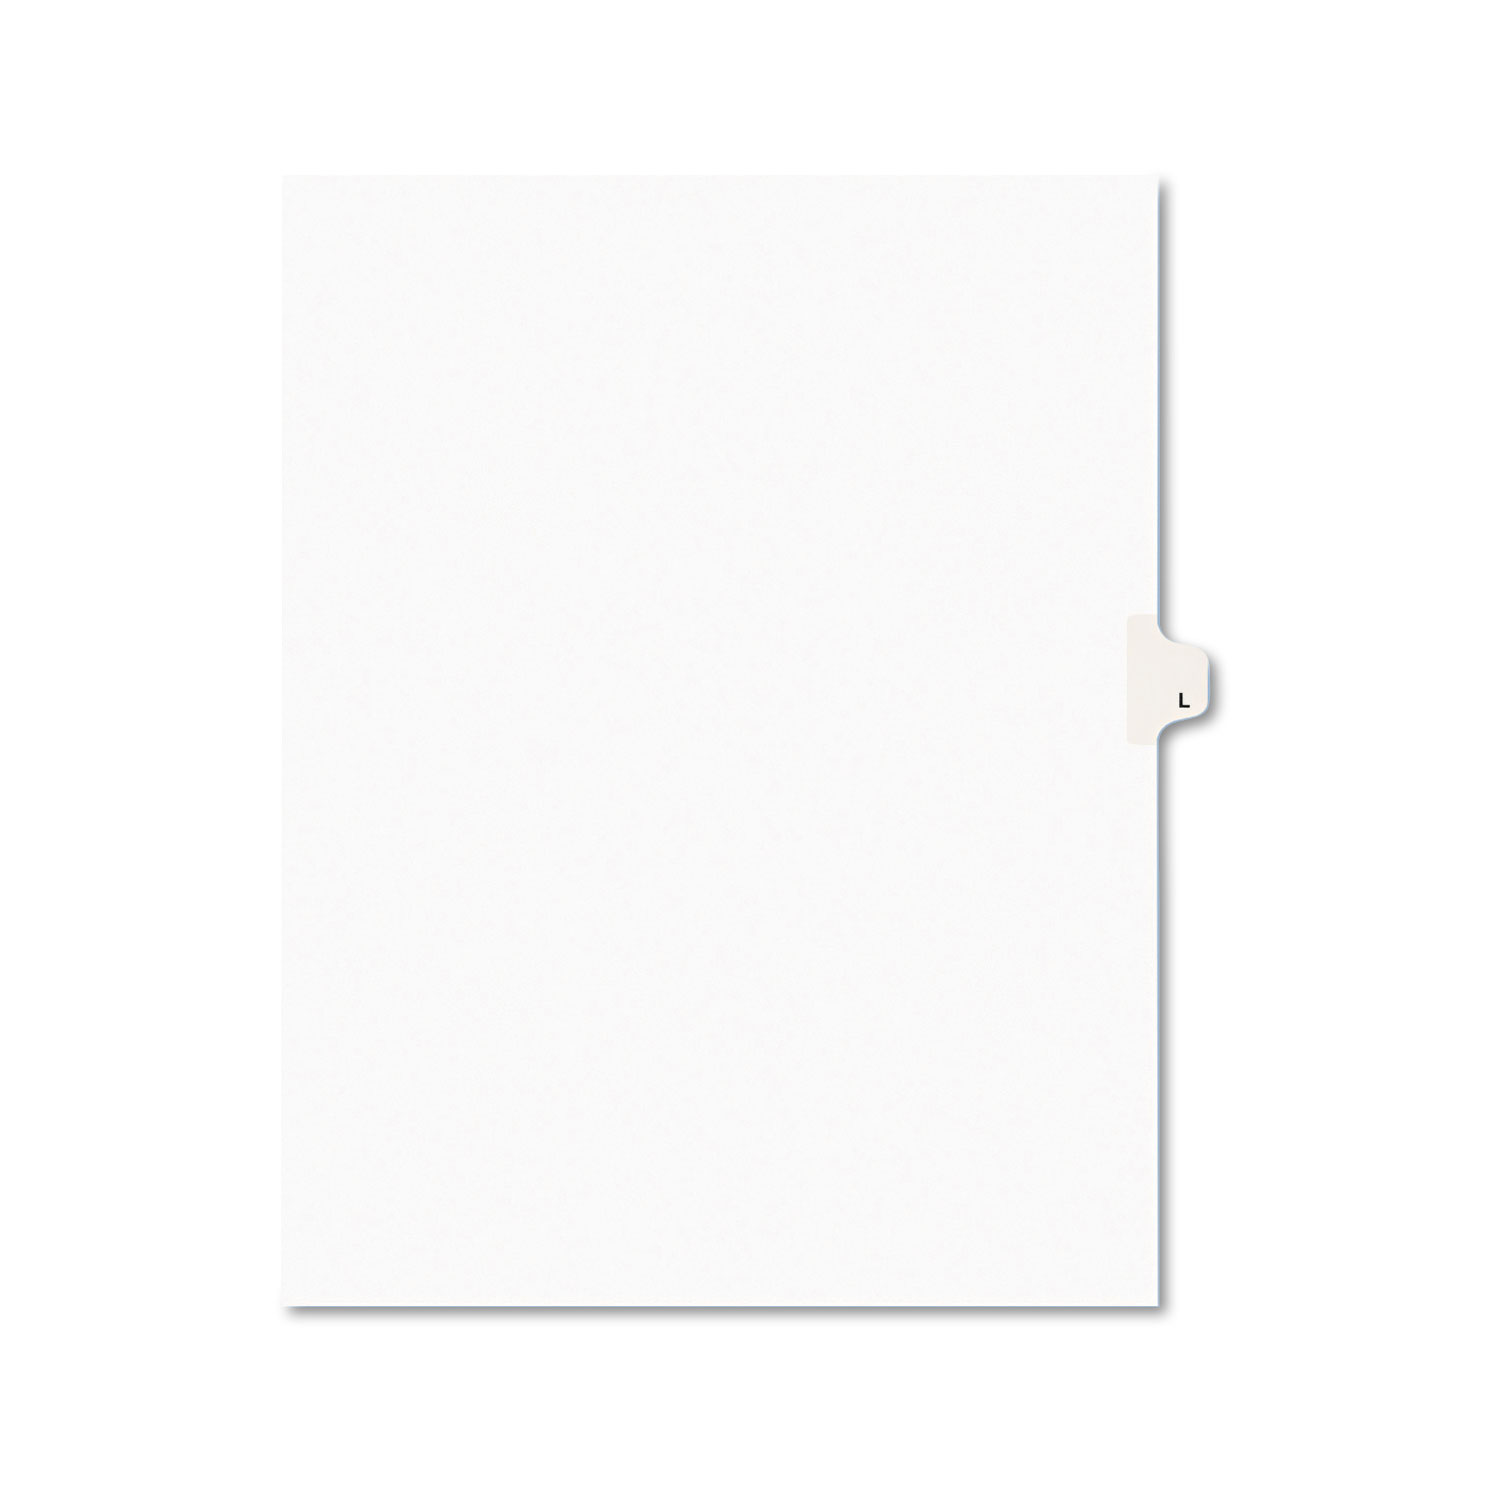  Avery 01412 Preprinted Legal Exhibit Side Tab Index Dividers, Avery Style, 26-Tab, L, 11 x 8.5, White, 25/Pack (AVE01412) 